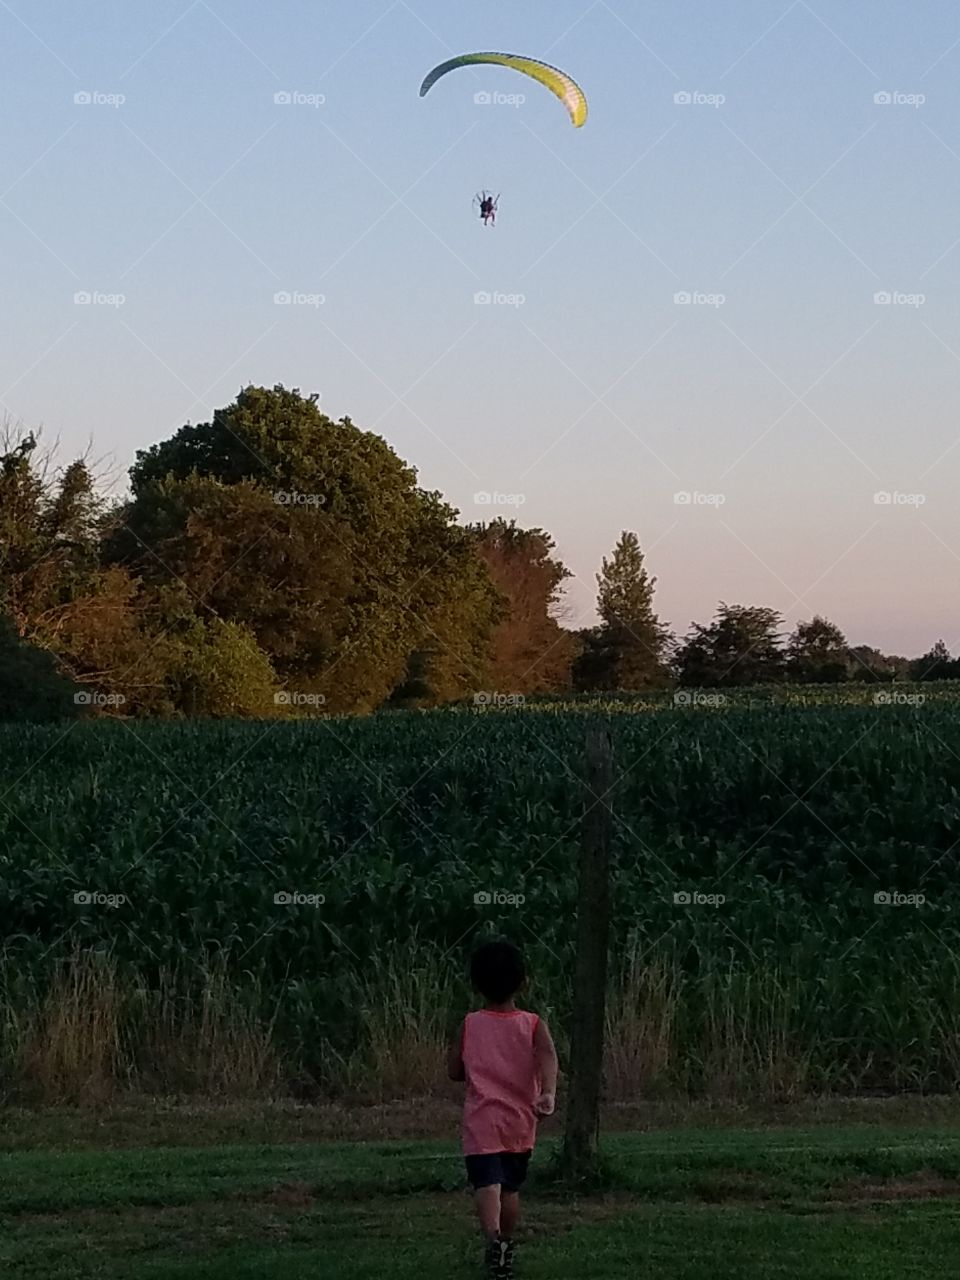 cool picture of kid running to see folks parachute glider in the sky